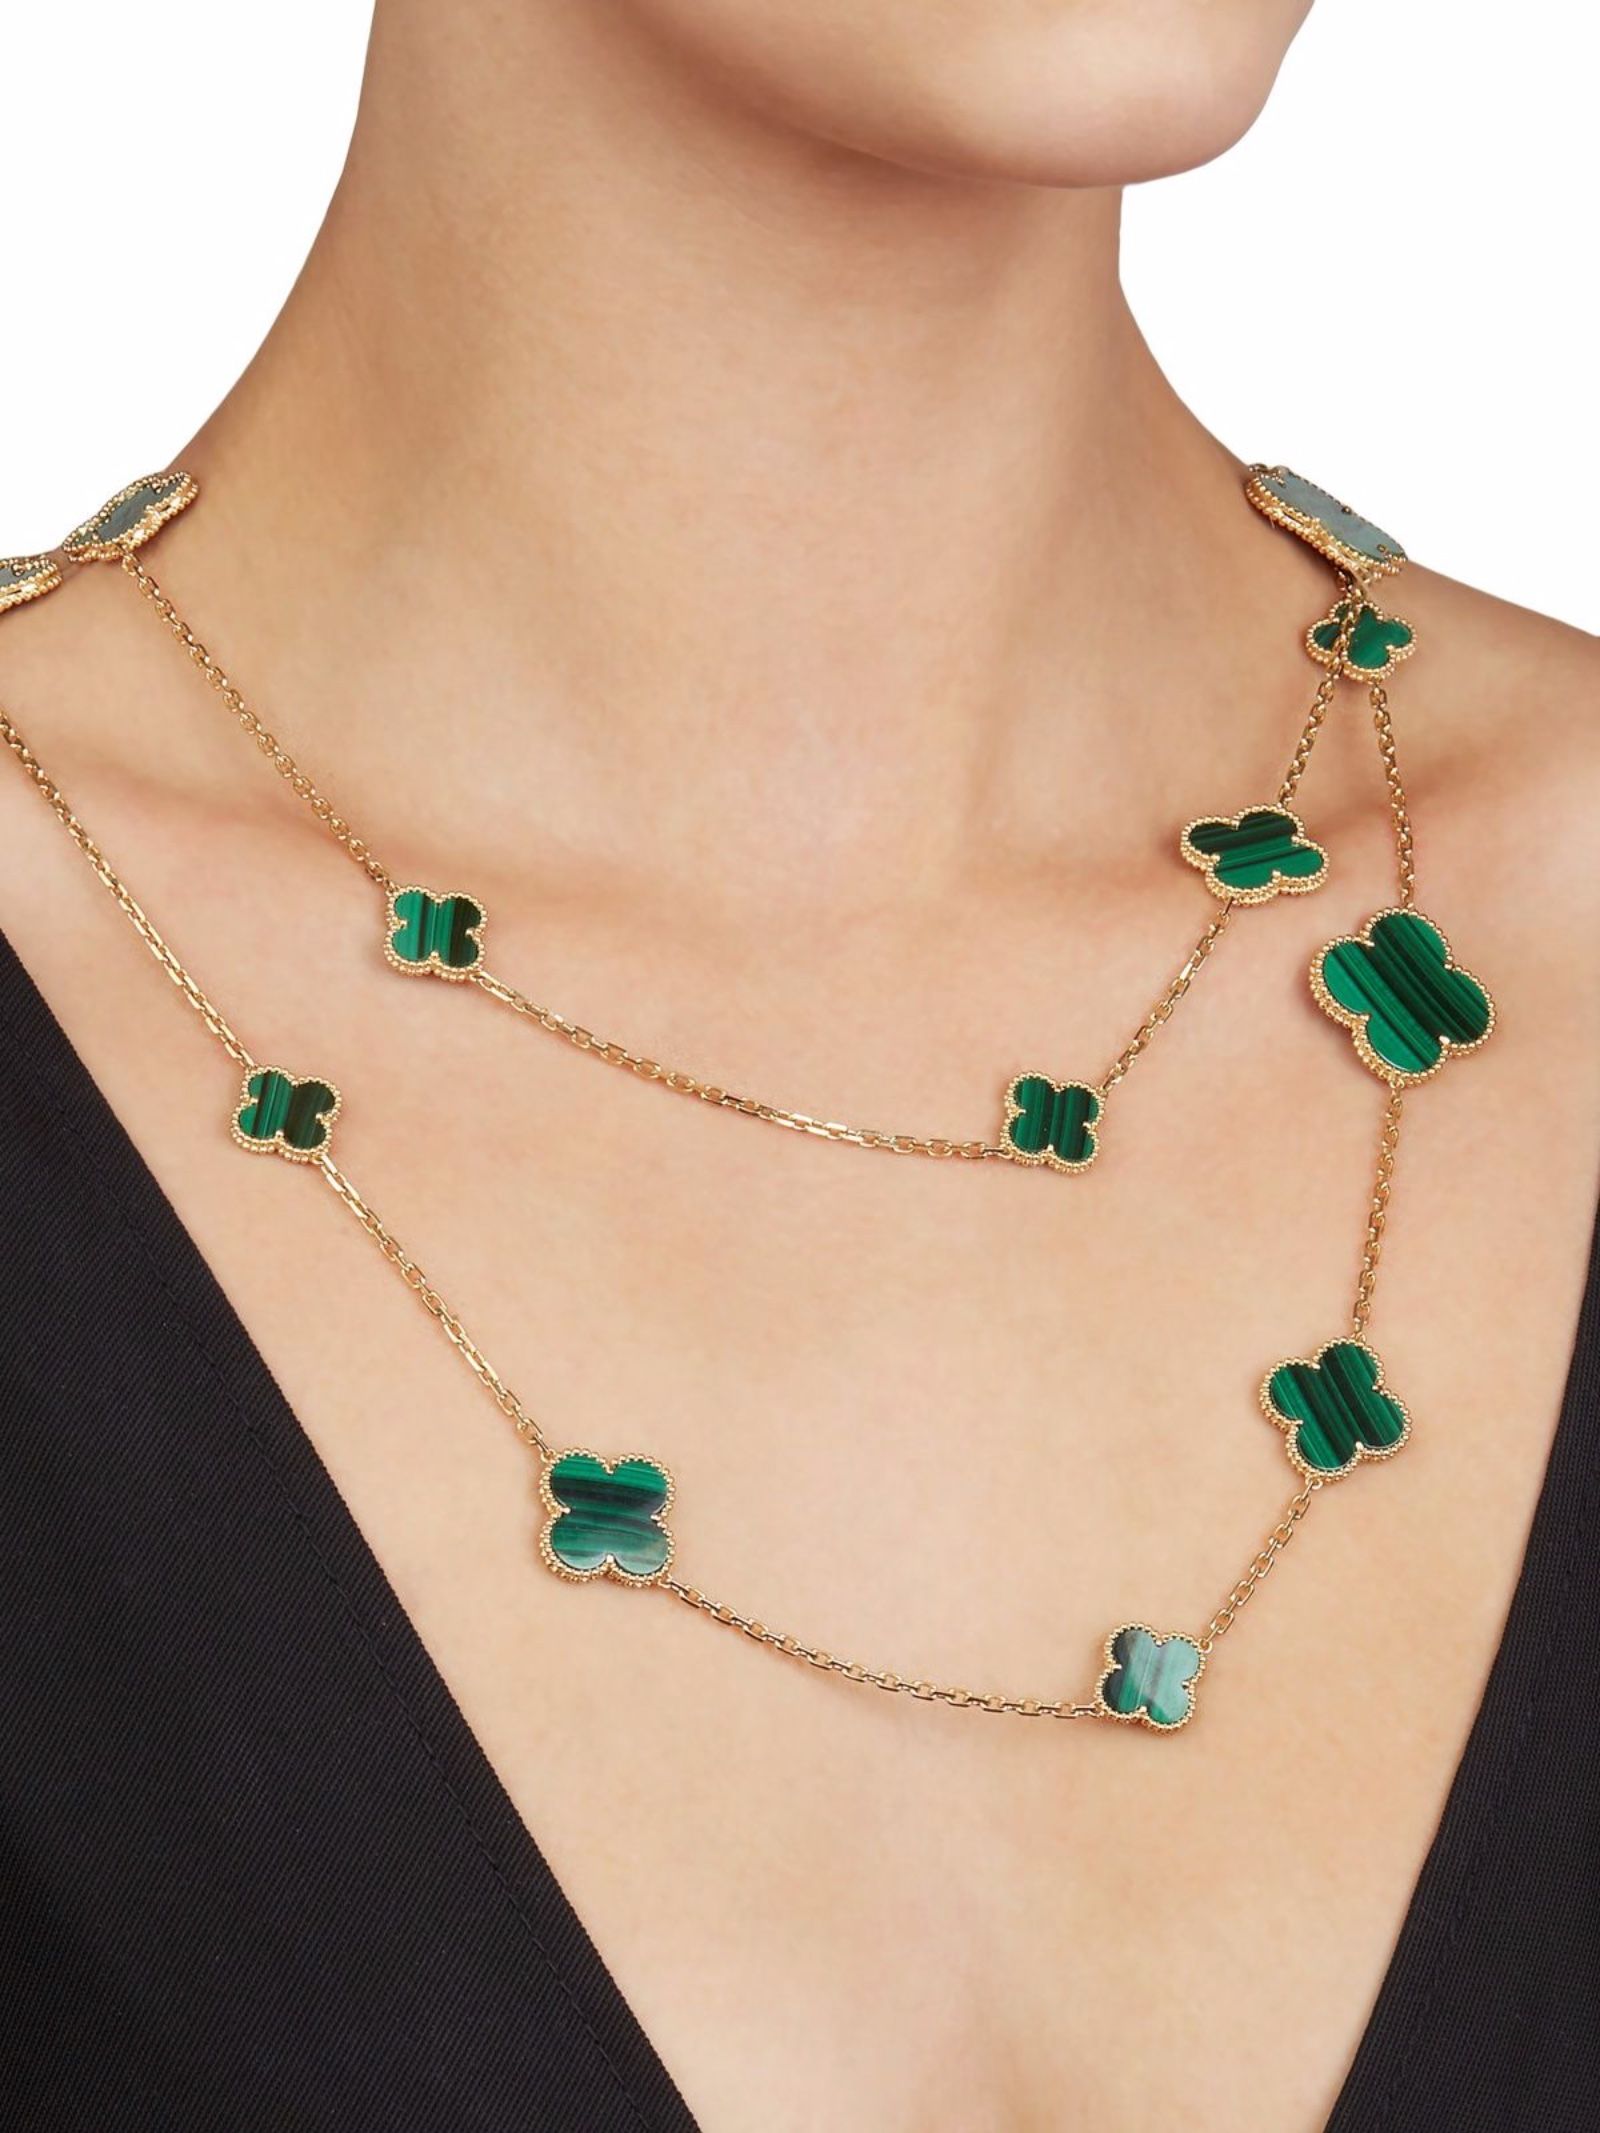 Halloween Schmuck Best Of This Necklace by Van Cleef & Arpels is From their Magic